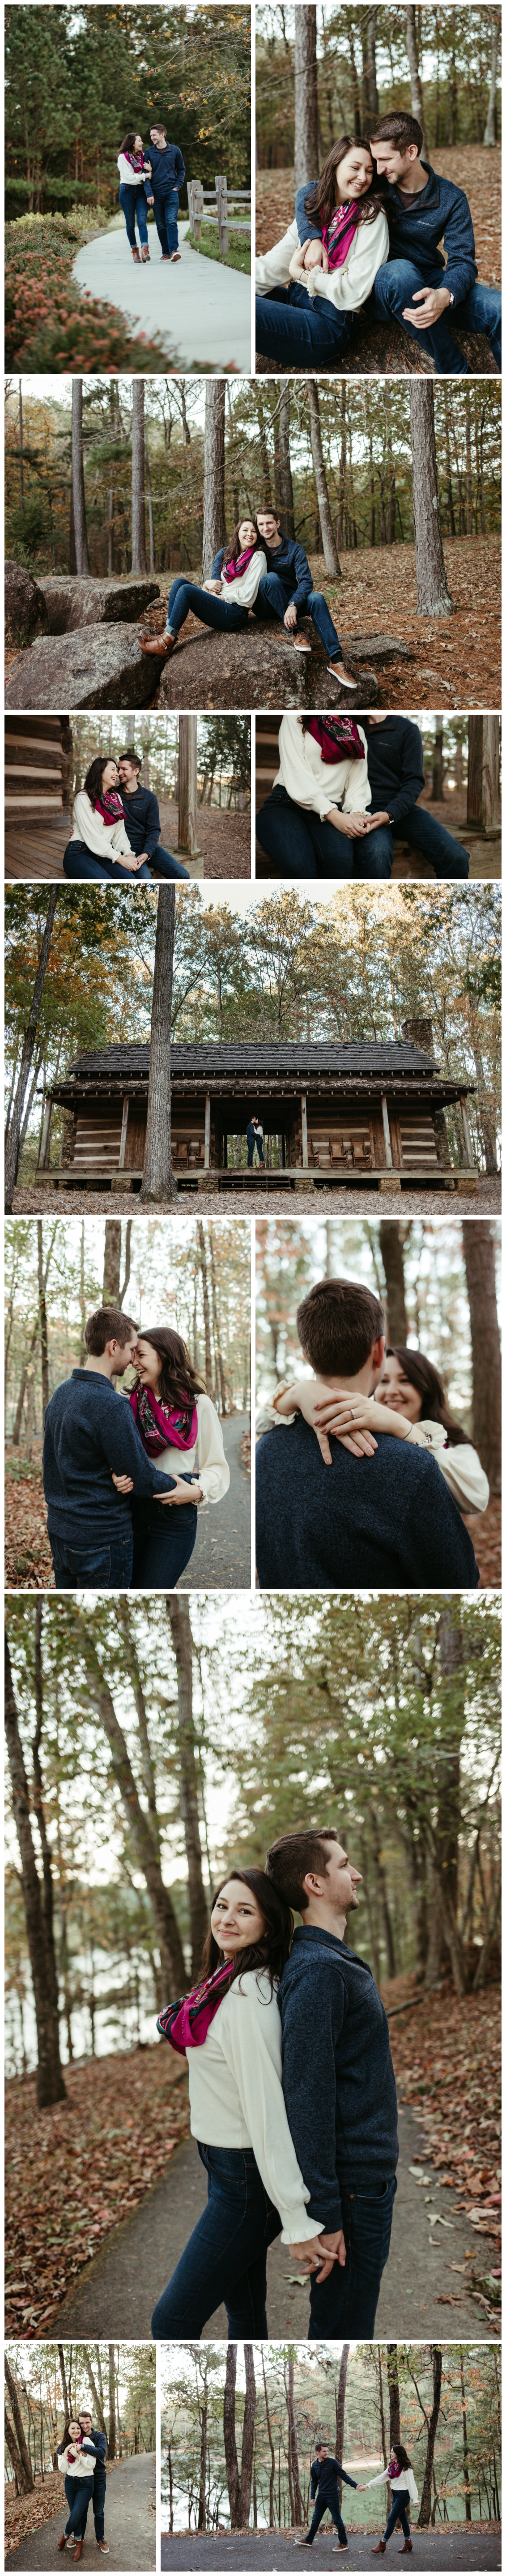 Fall themed engagement session at the cabin